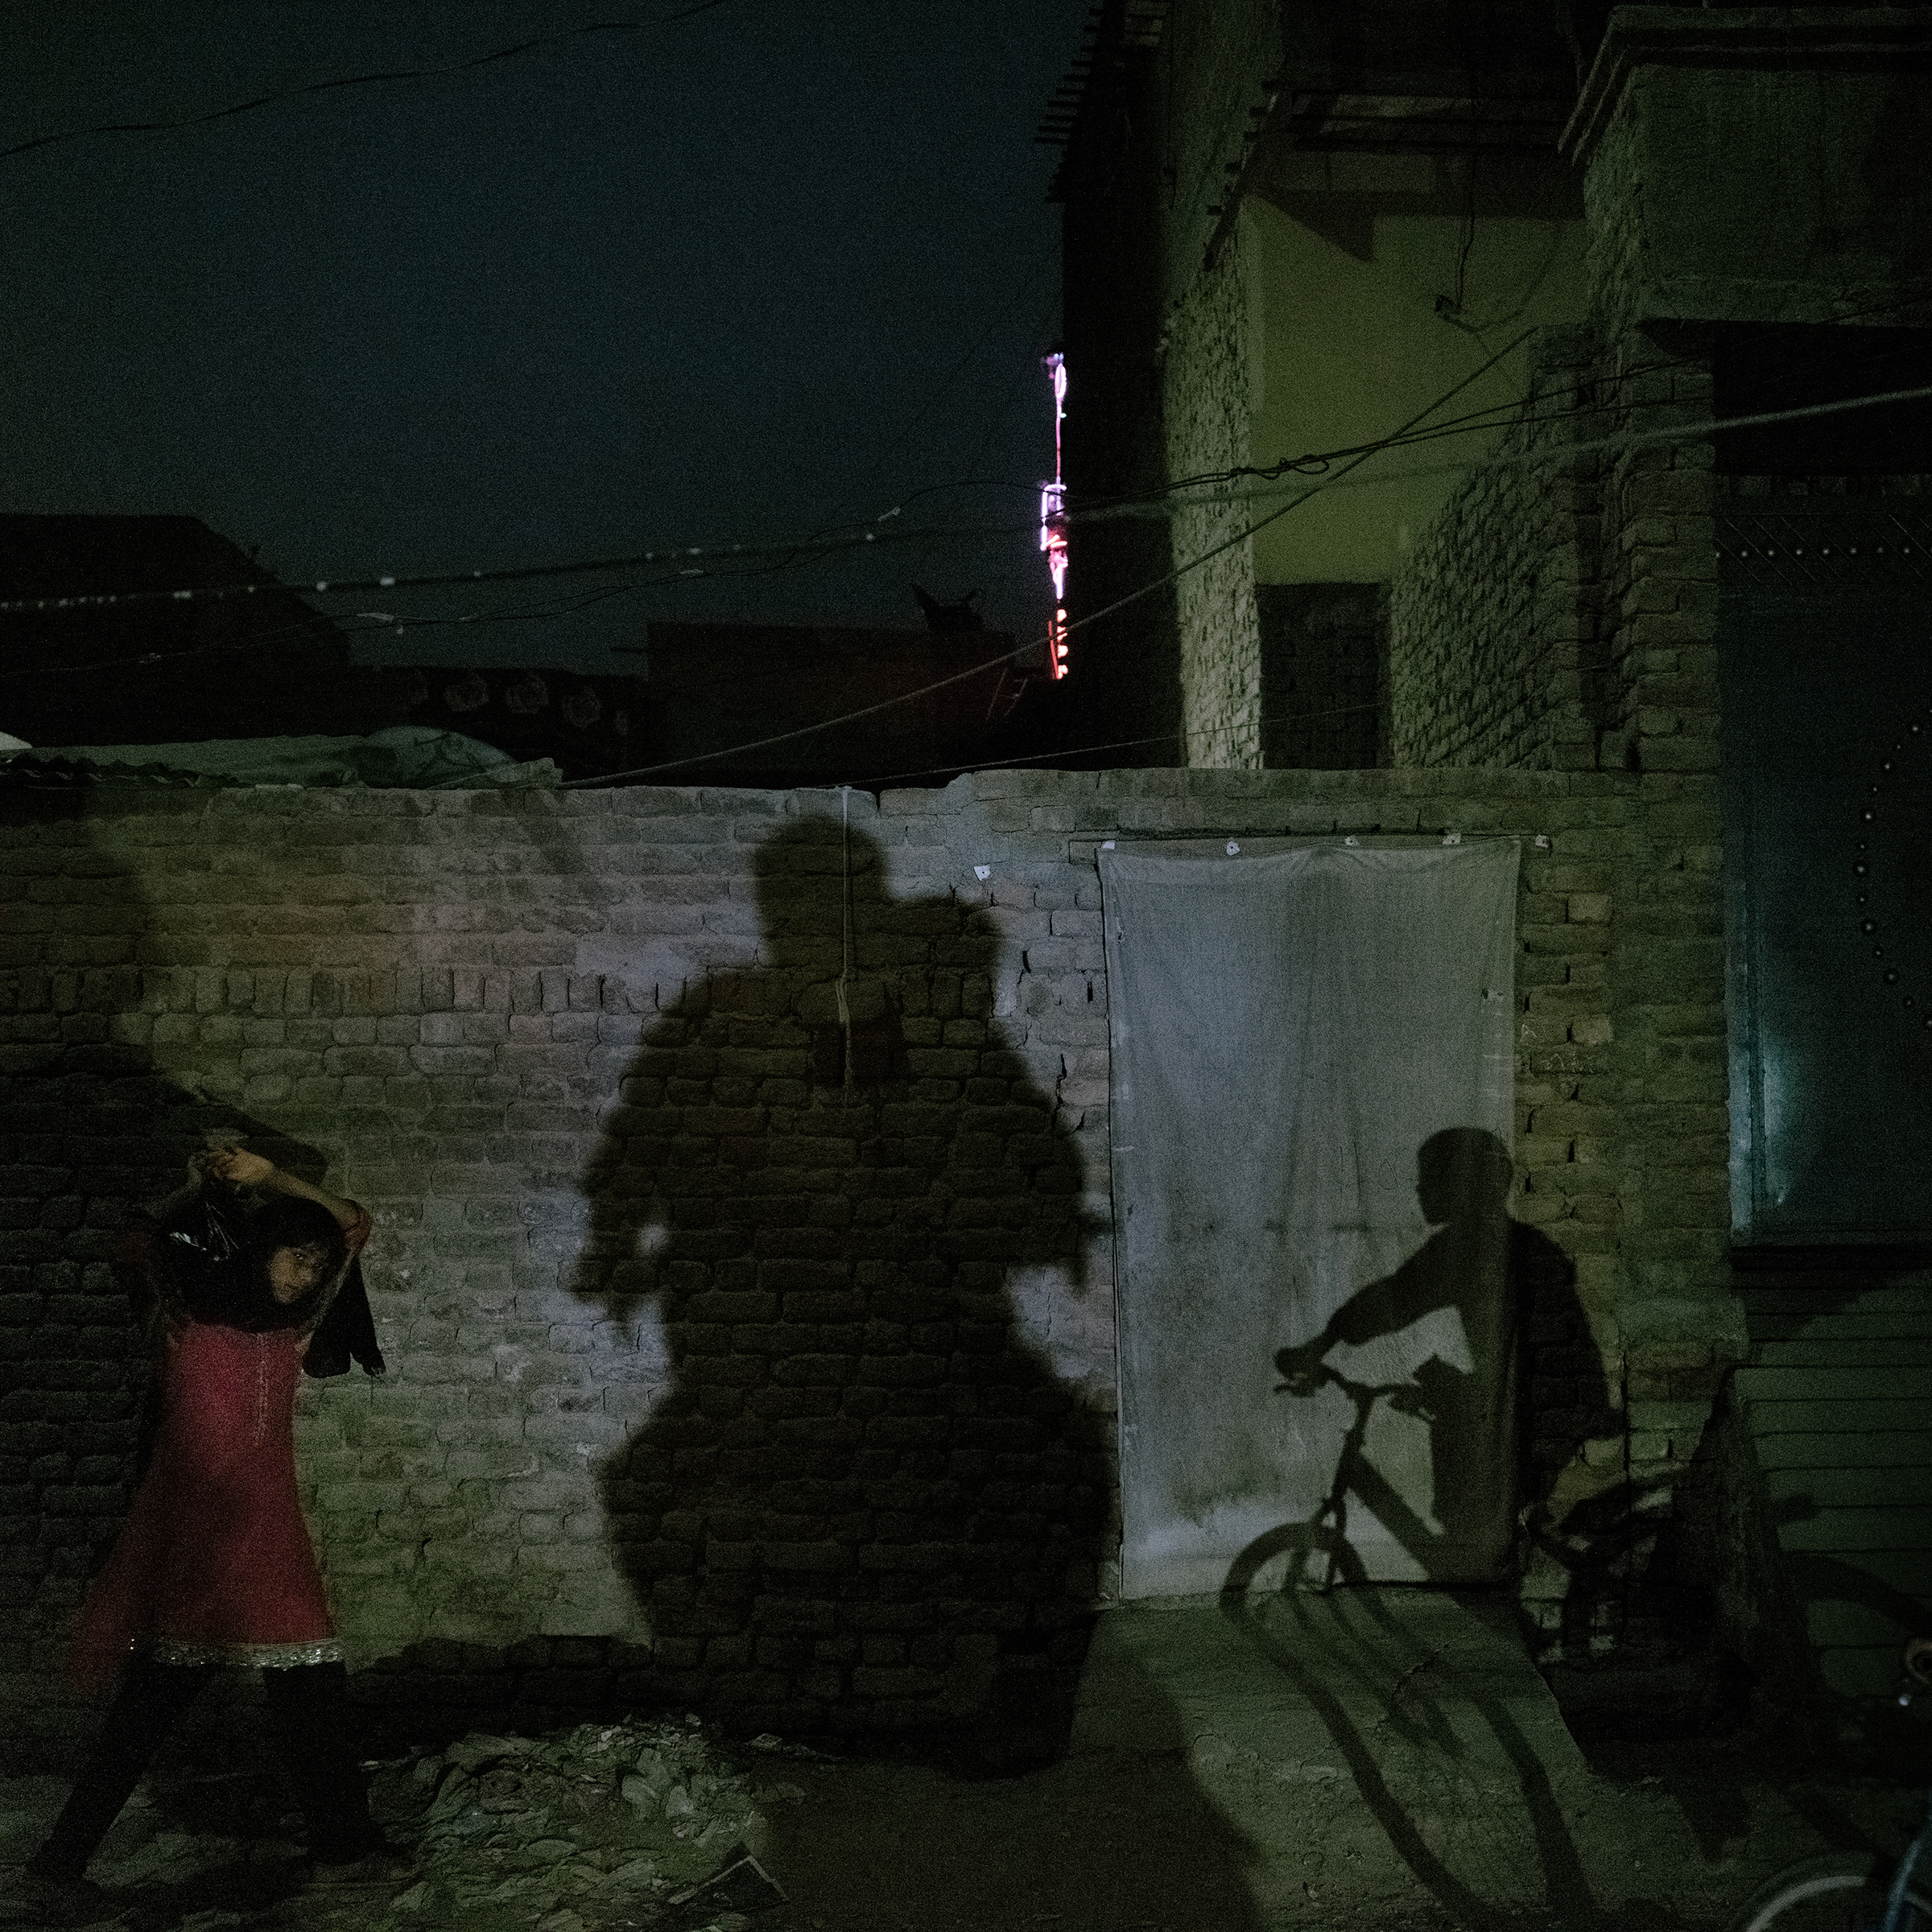 A range of activities happen at night in Jacobabad on June 27: a girl returns home with groceries; a boy rides a bicycle; and a father and son ride home on a motorcycle. Sept. 23 issue. (Matthieu Paley for TIME)